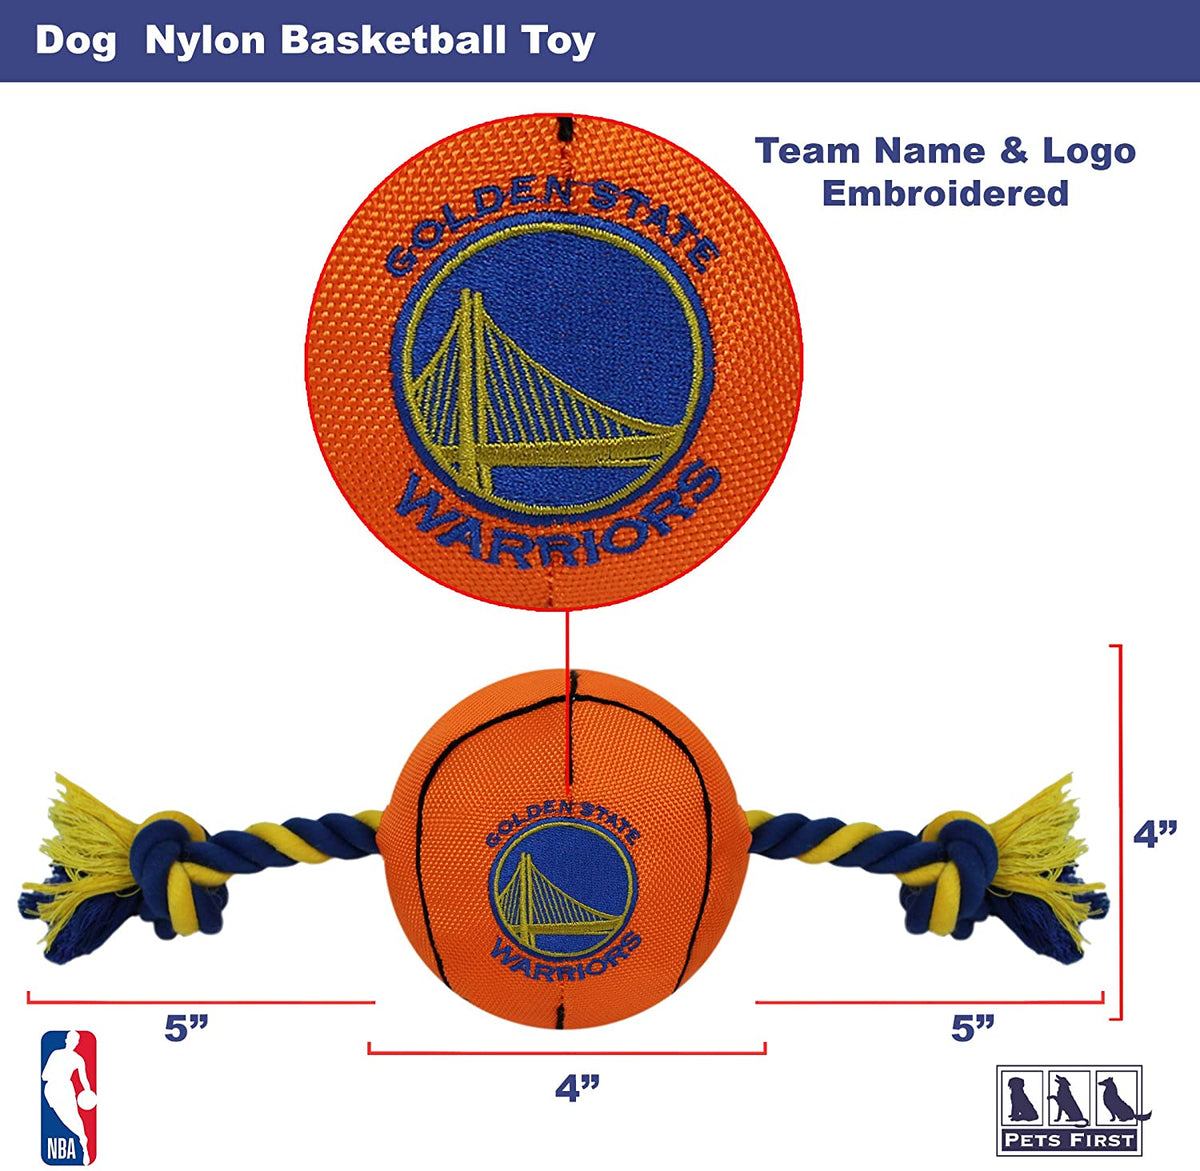 Golden State Warriors Ball Rope Toys - 3 Red Rovers